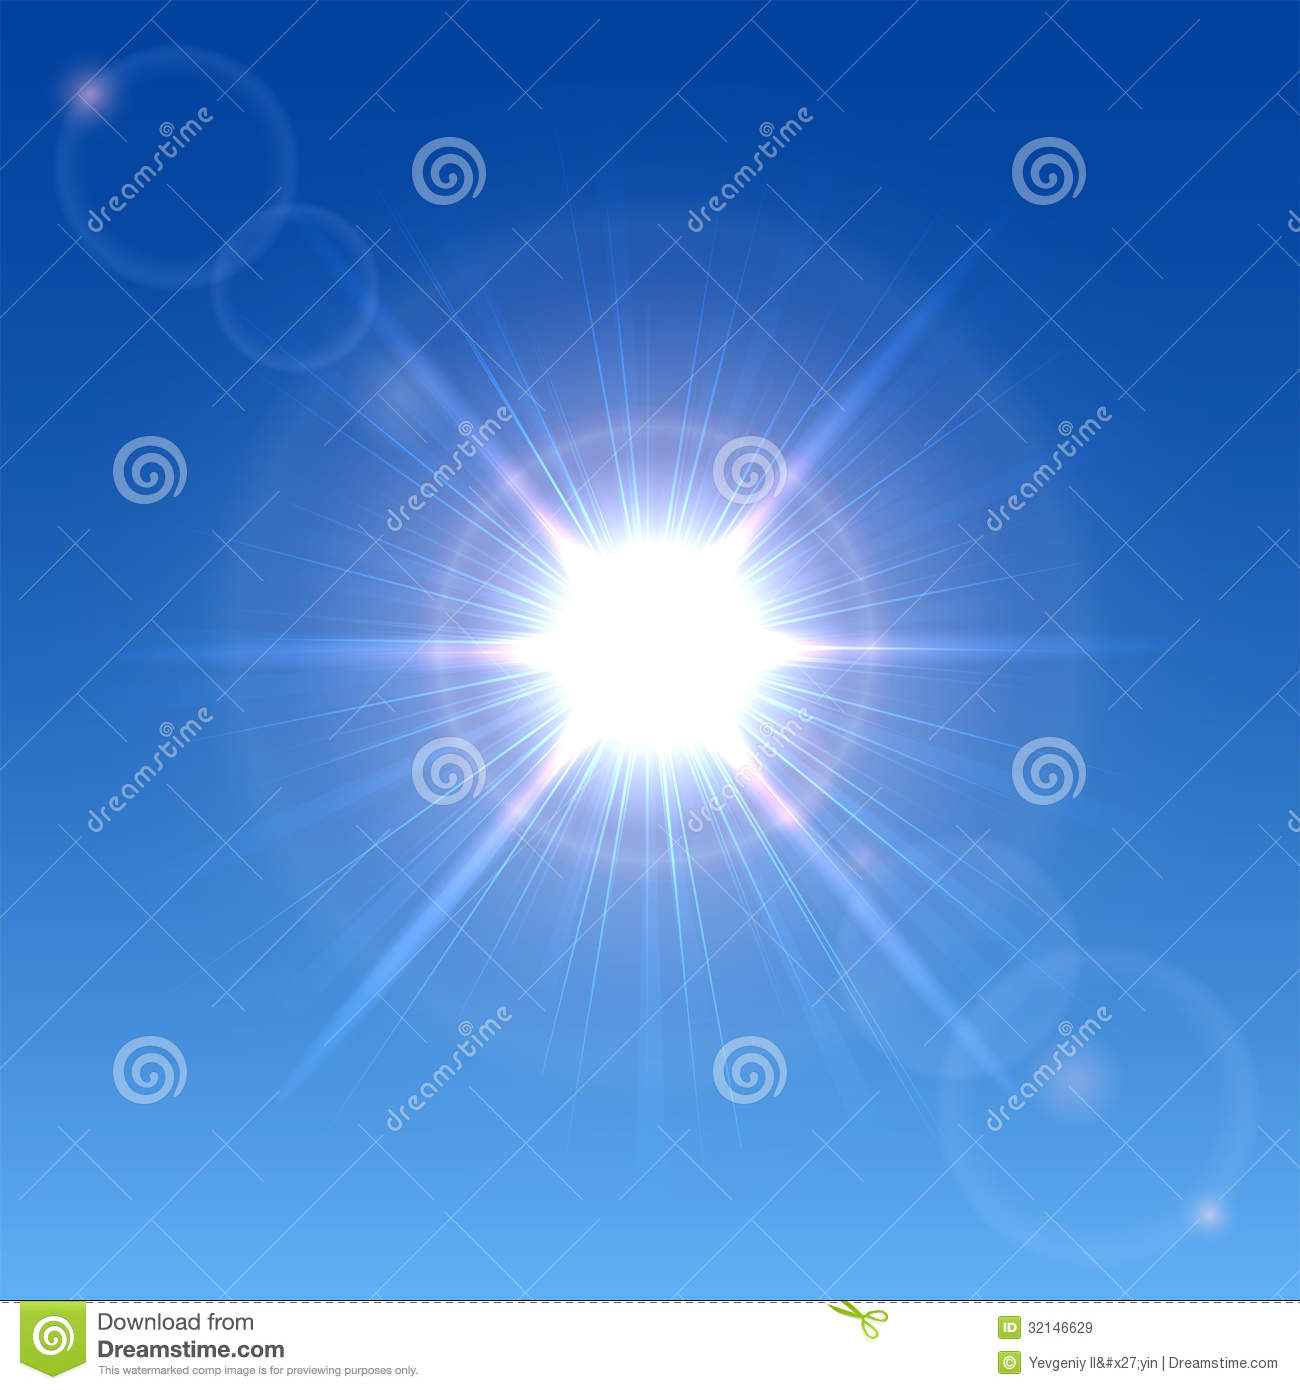 Sun In The Sky Royalty Free Stock Images   Image  32146629